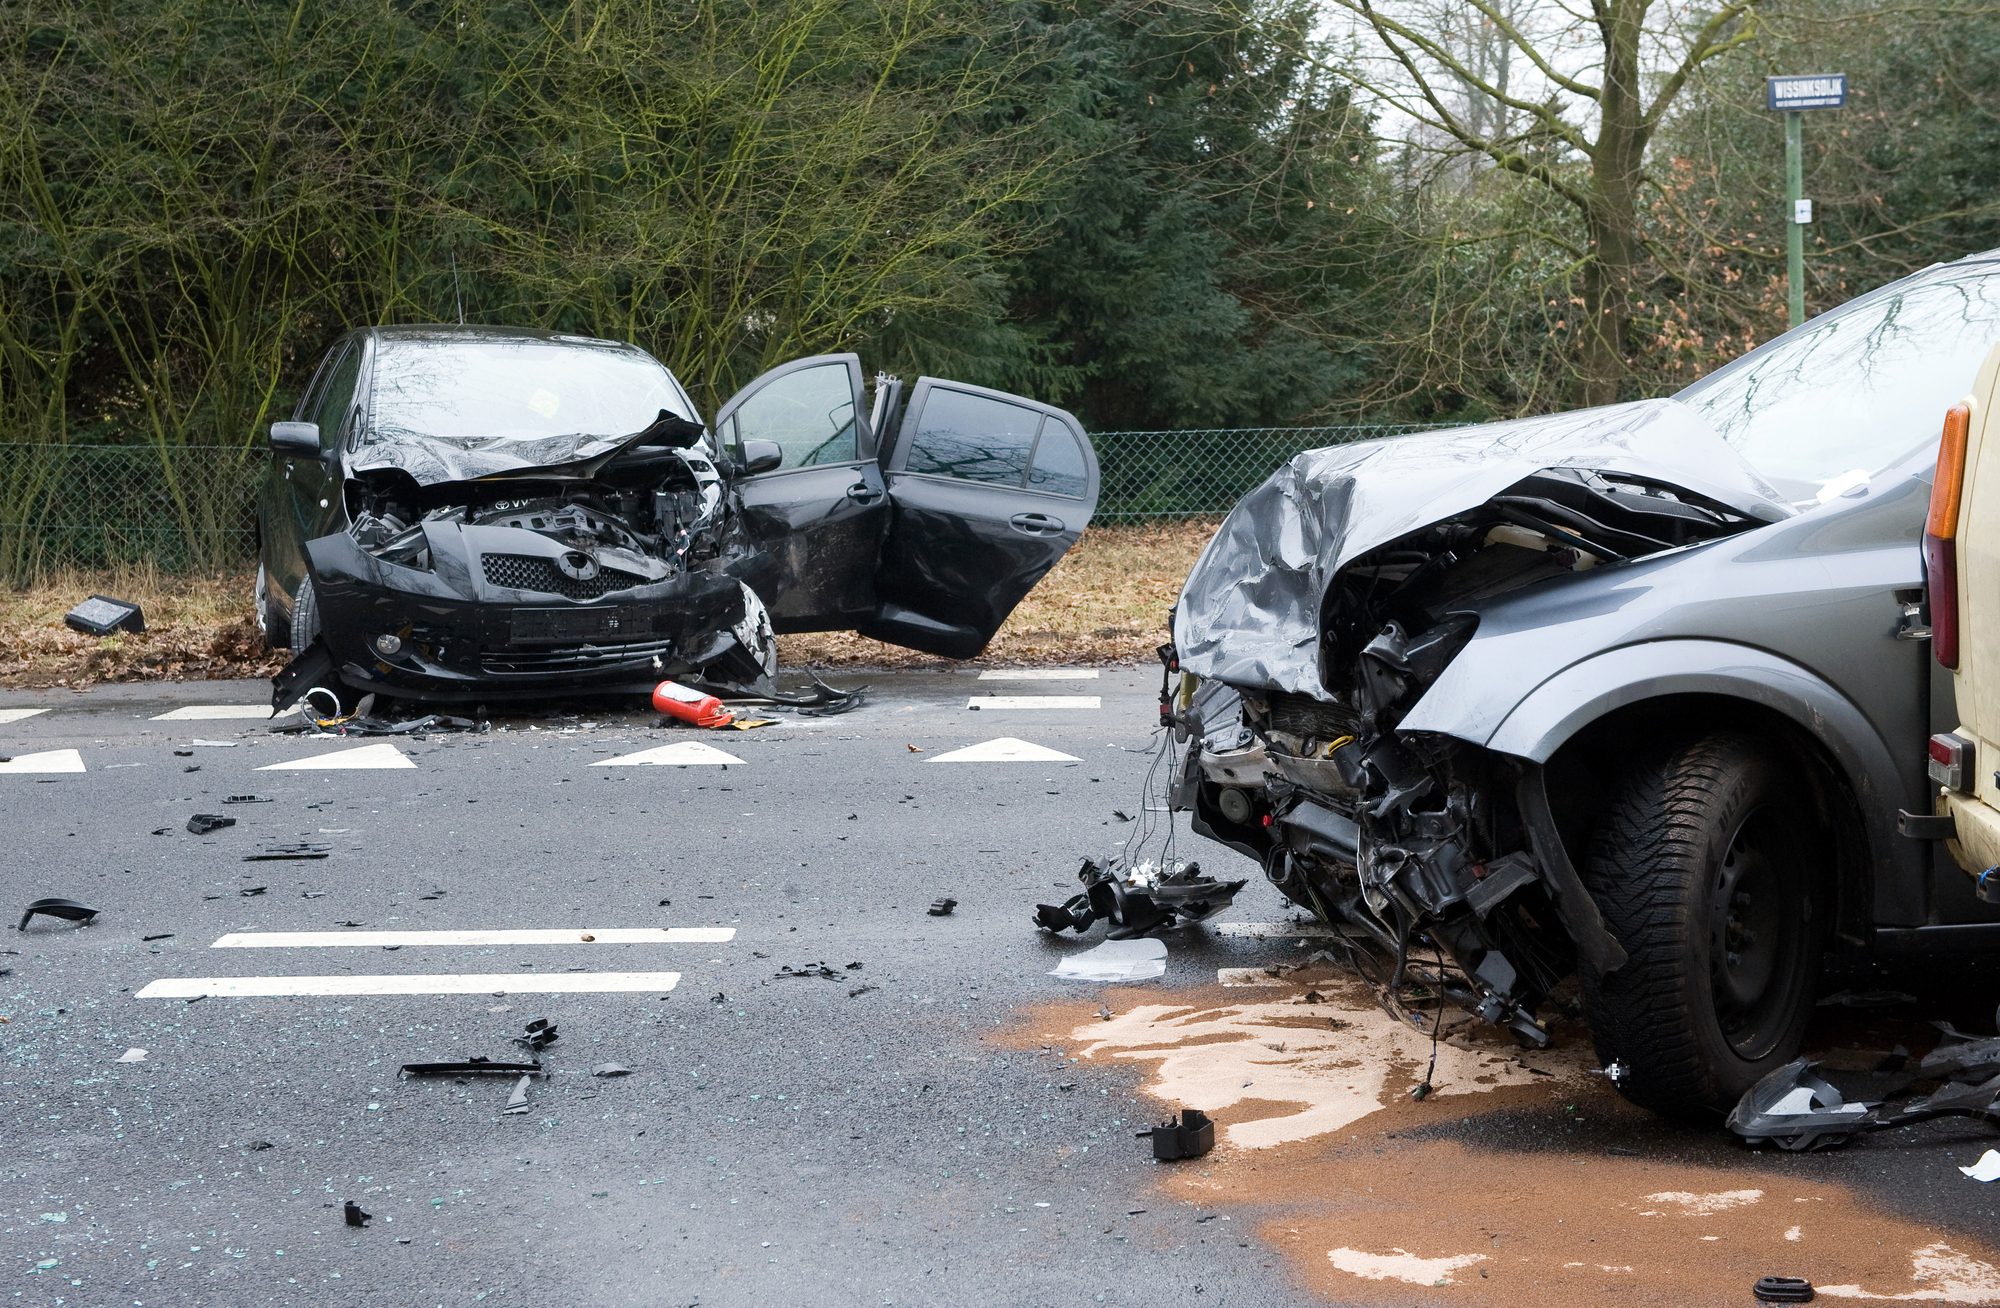 When Is a Vehicle Considered a “Total Loss” After an Accident?